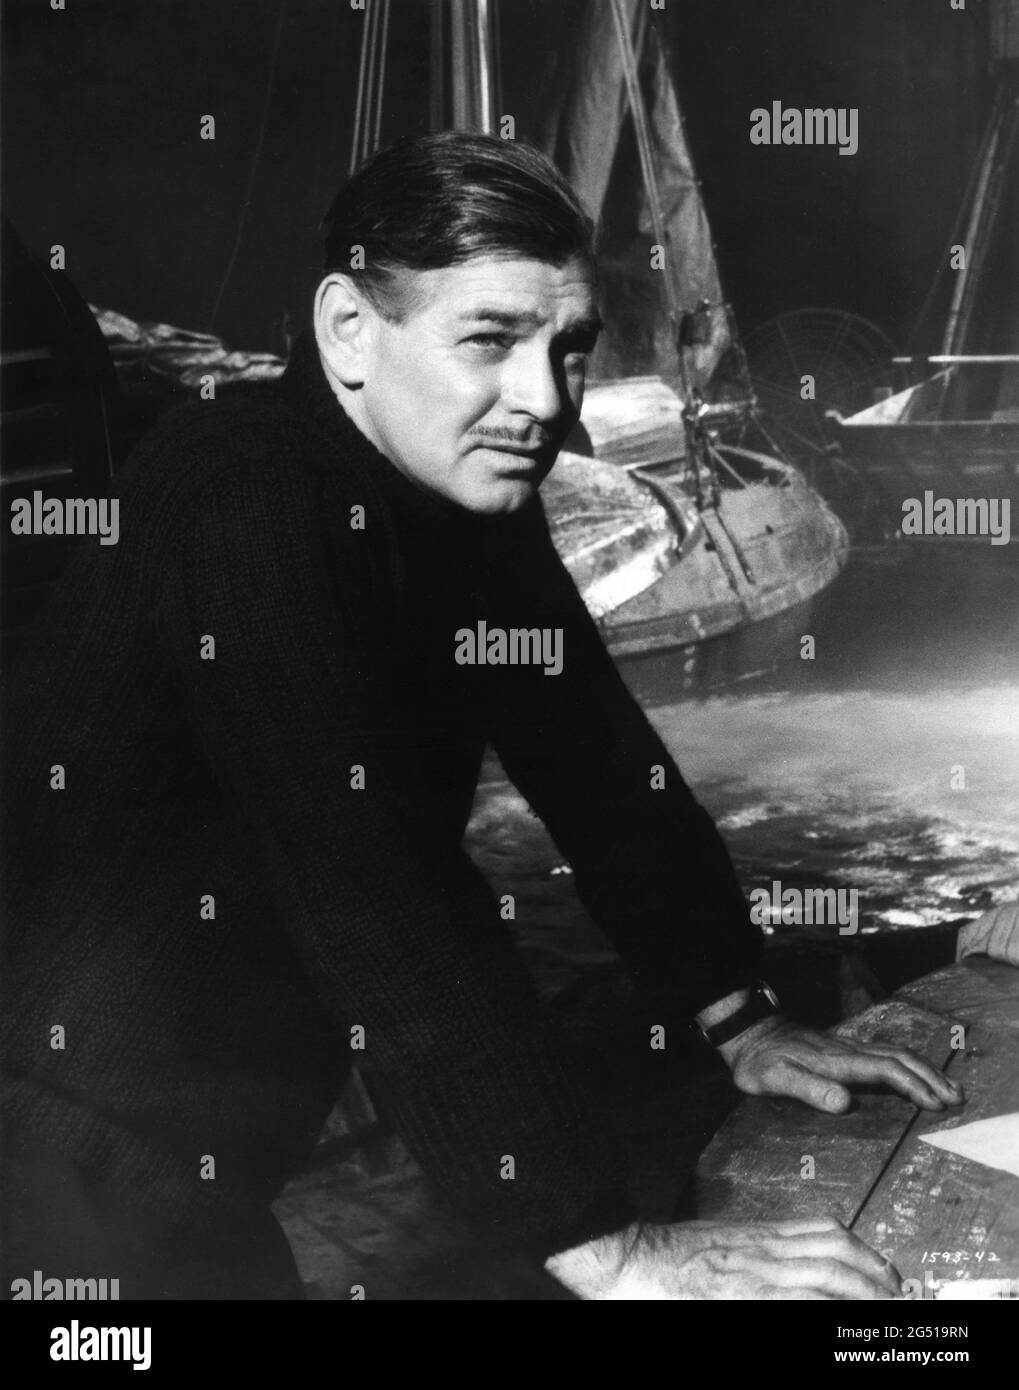 CLARK GABLE on set candid portrait during filming of NEVER LET ME GO 1953 director DELMER DAVES from novel Come The Dawn by Paul Winterton producer Clarence Brown Metro Goldwyn Mayer Stock Photo